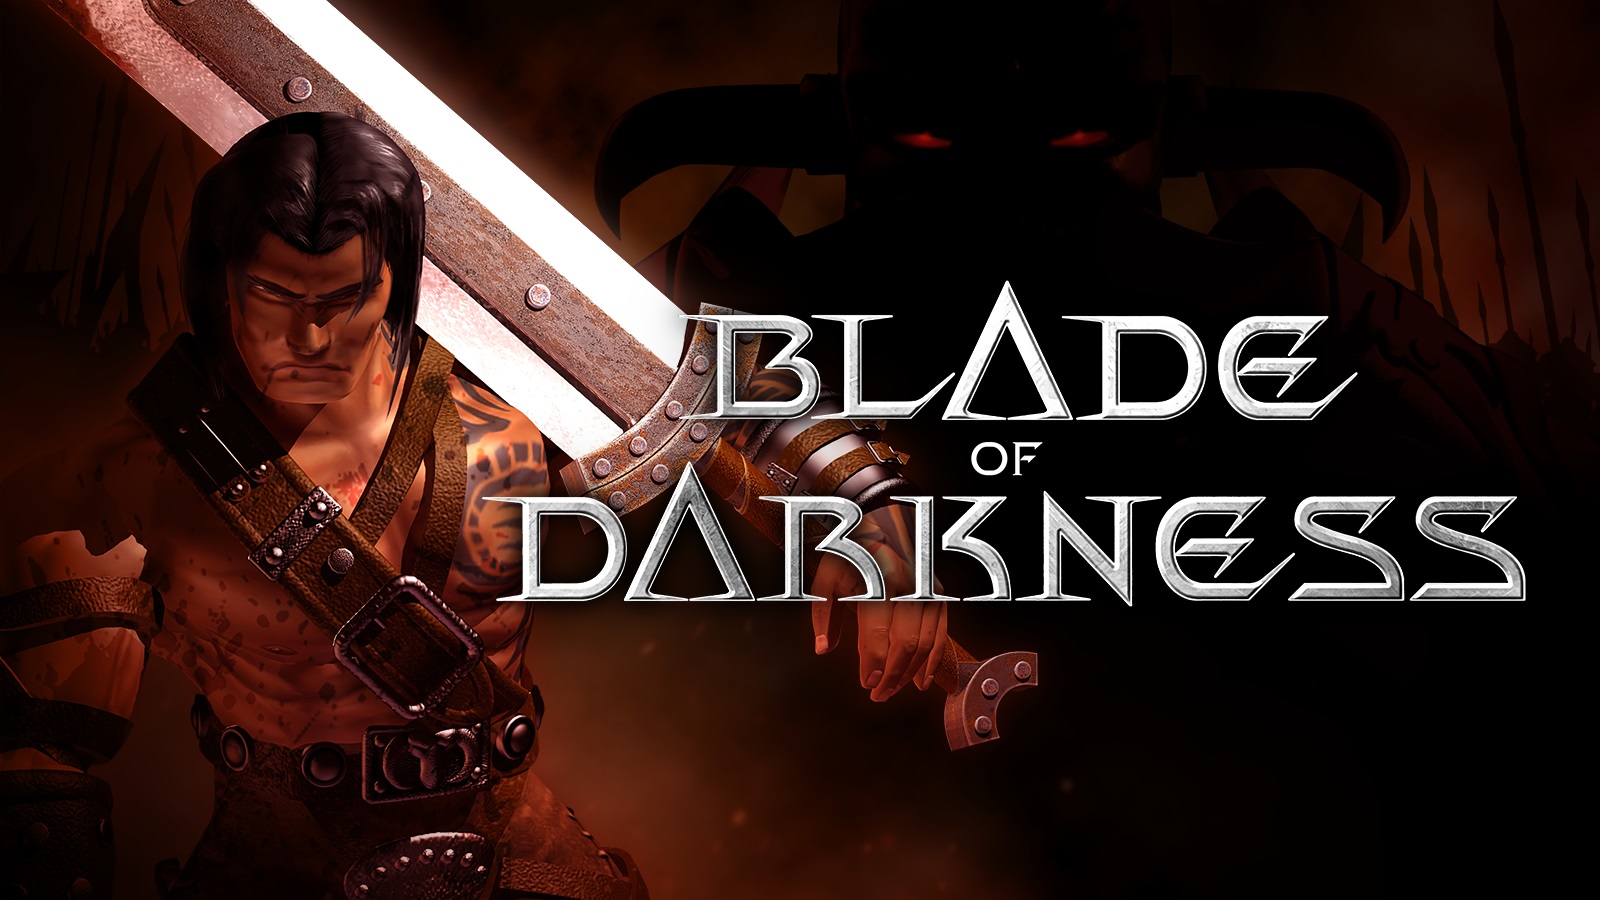 Blade of Darkness is Getting an HD Re-Release